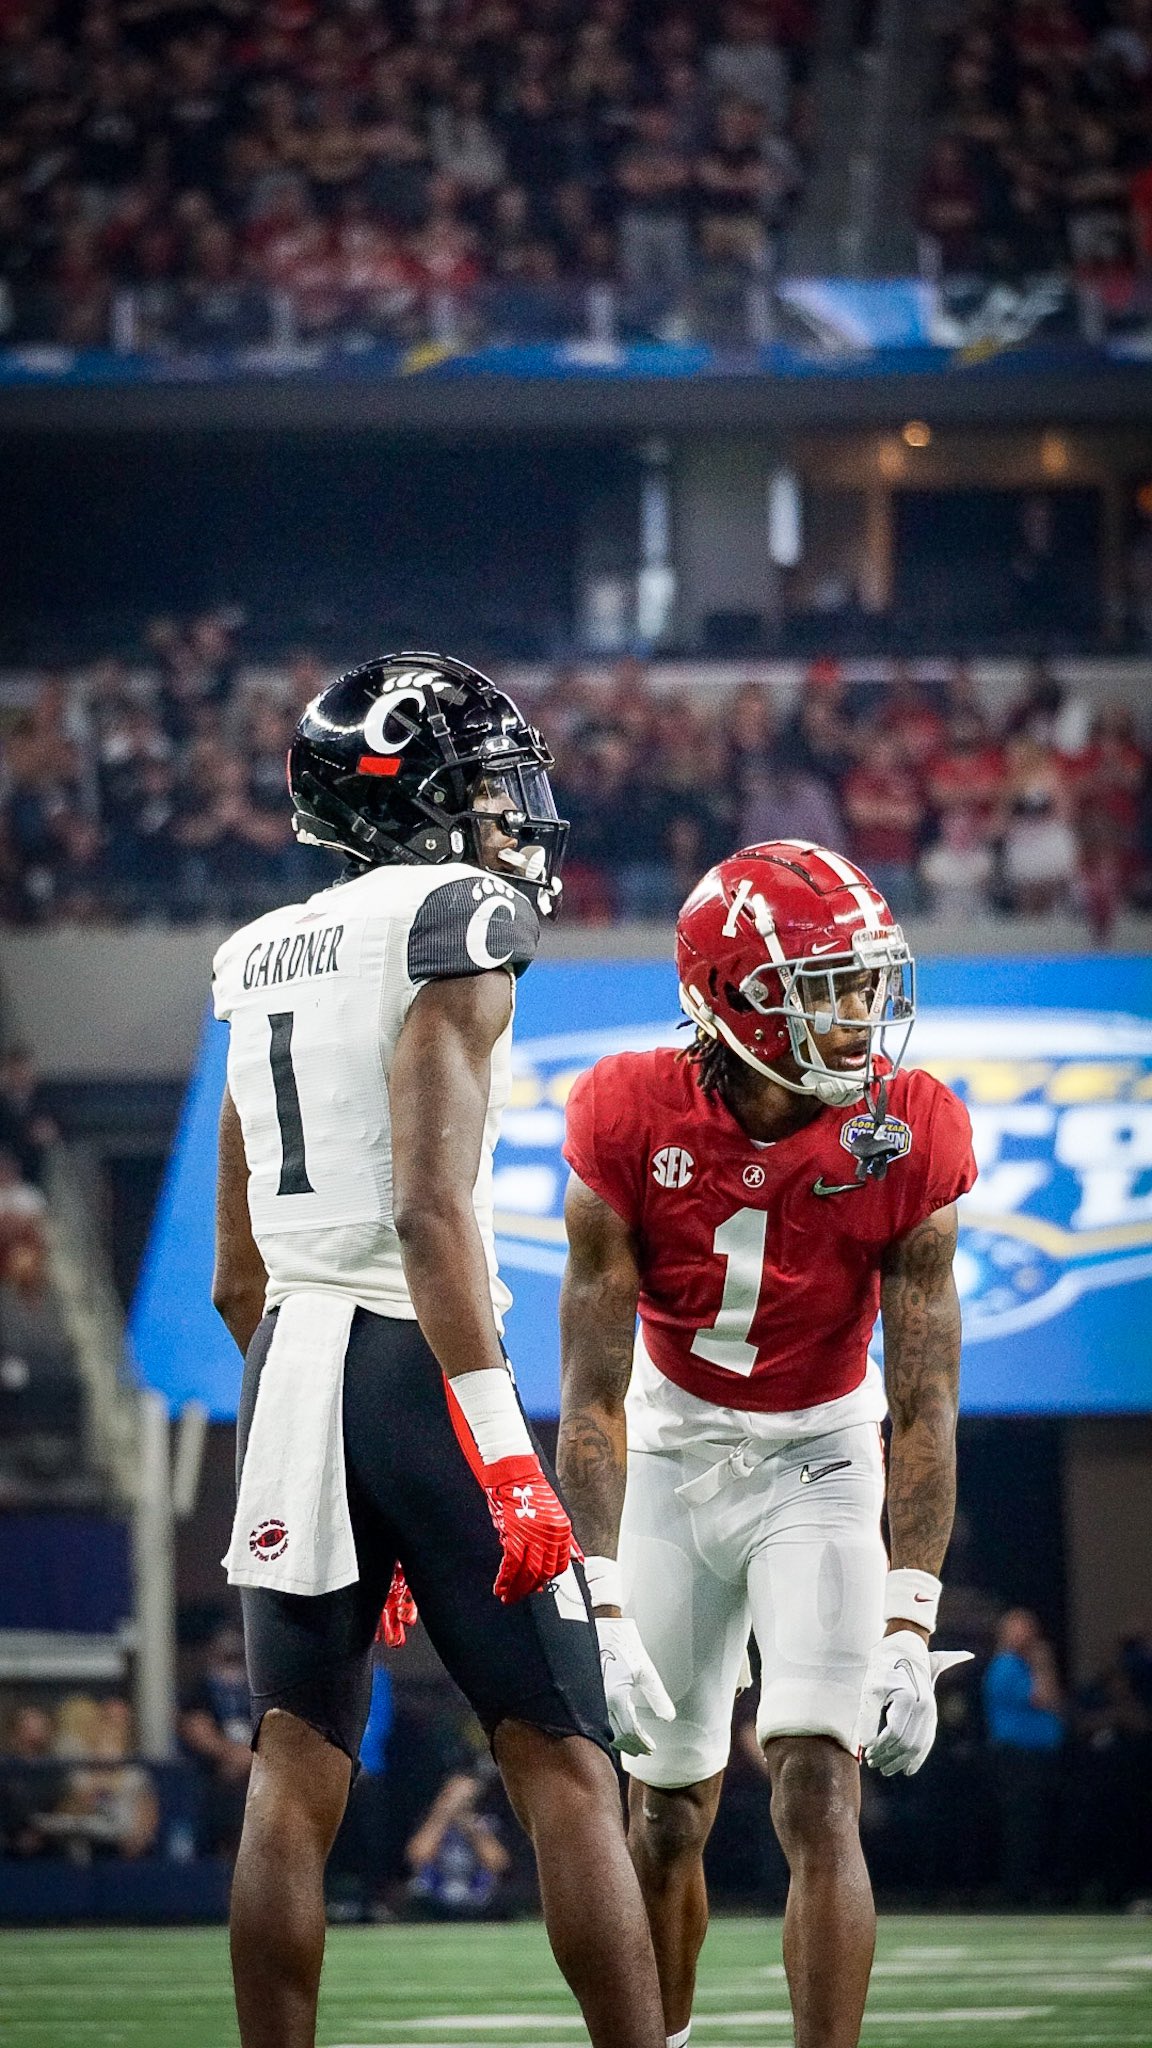 B. Fox on X: 'Sauce Gardner finished his #Bearcats career with zero  touchdowns allowed. None. Alabama's Jameson Williams was targeted two times  while Sauce was defending him. On the game, he had